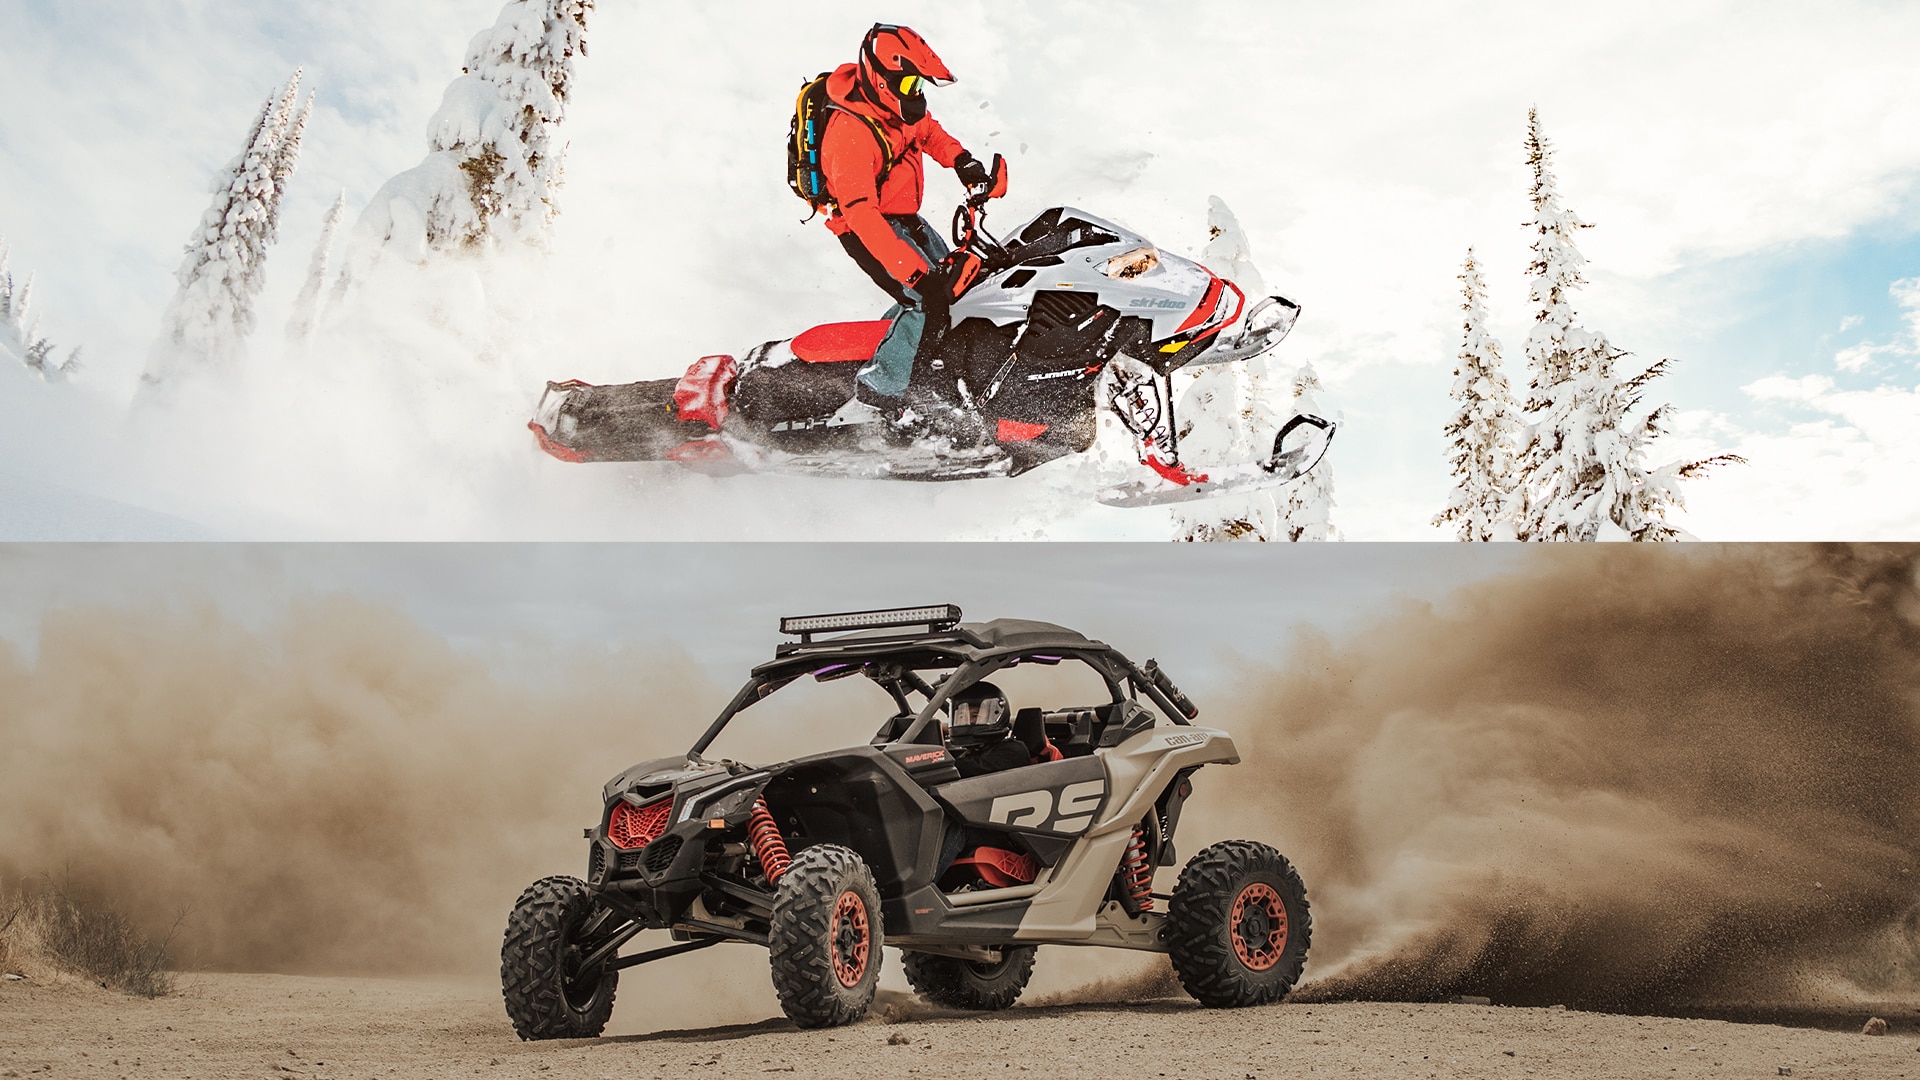 Snowmobile or Off-Road, find your freedom in every season